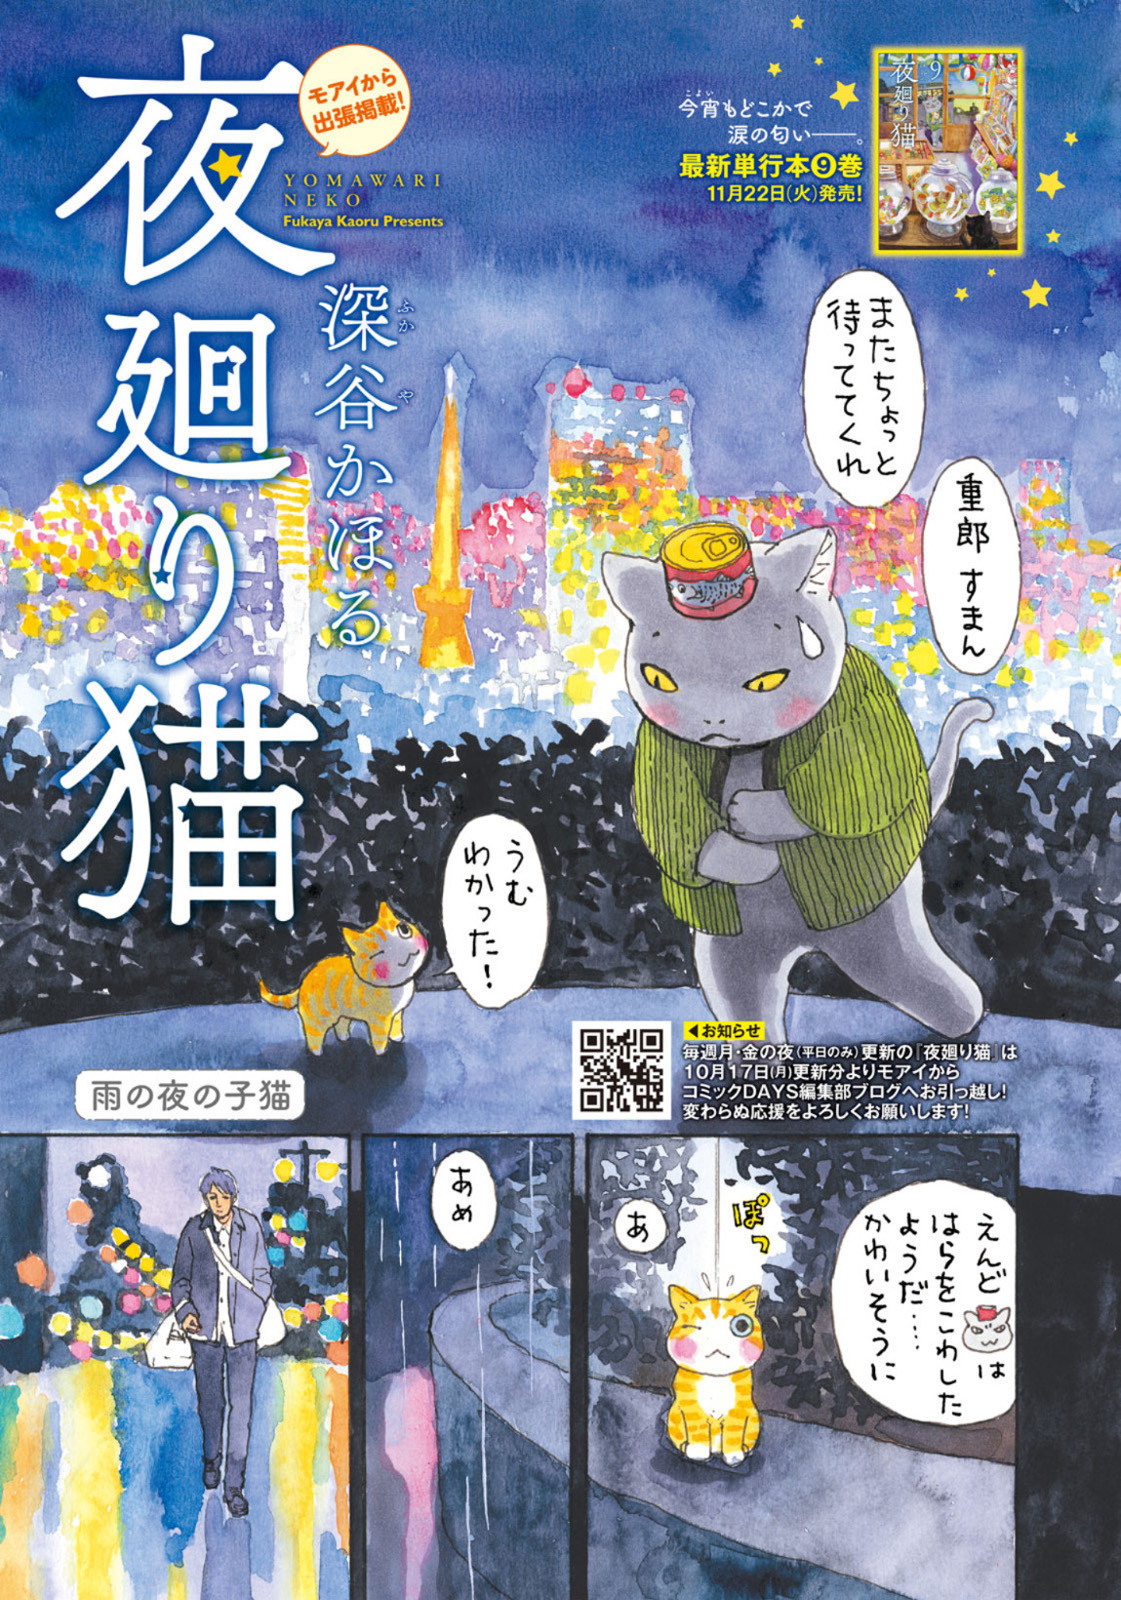 Weekly Morning - 週刊モーニング - Chapter 2022-46 - Page 3